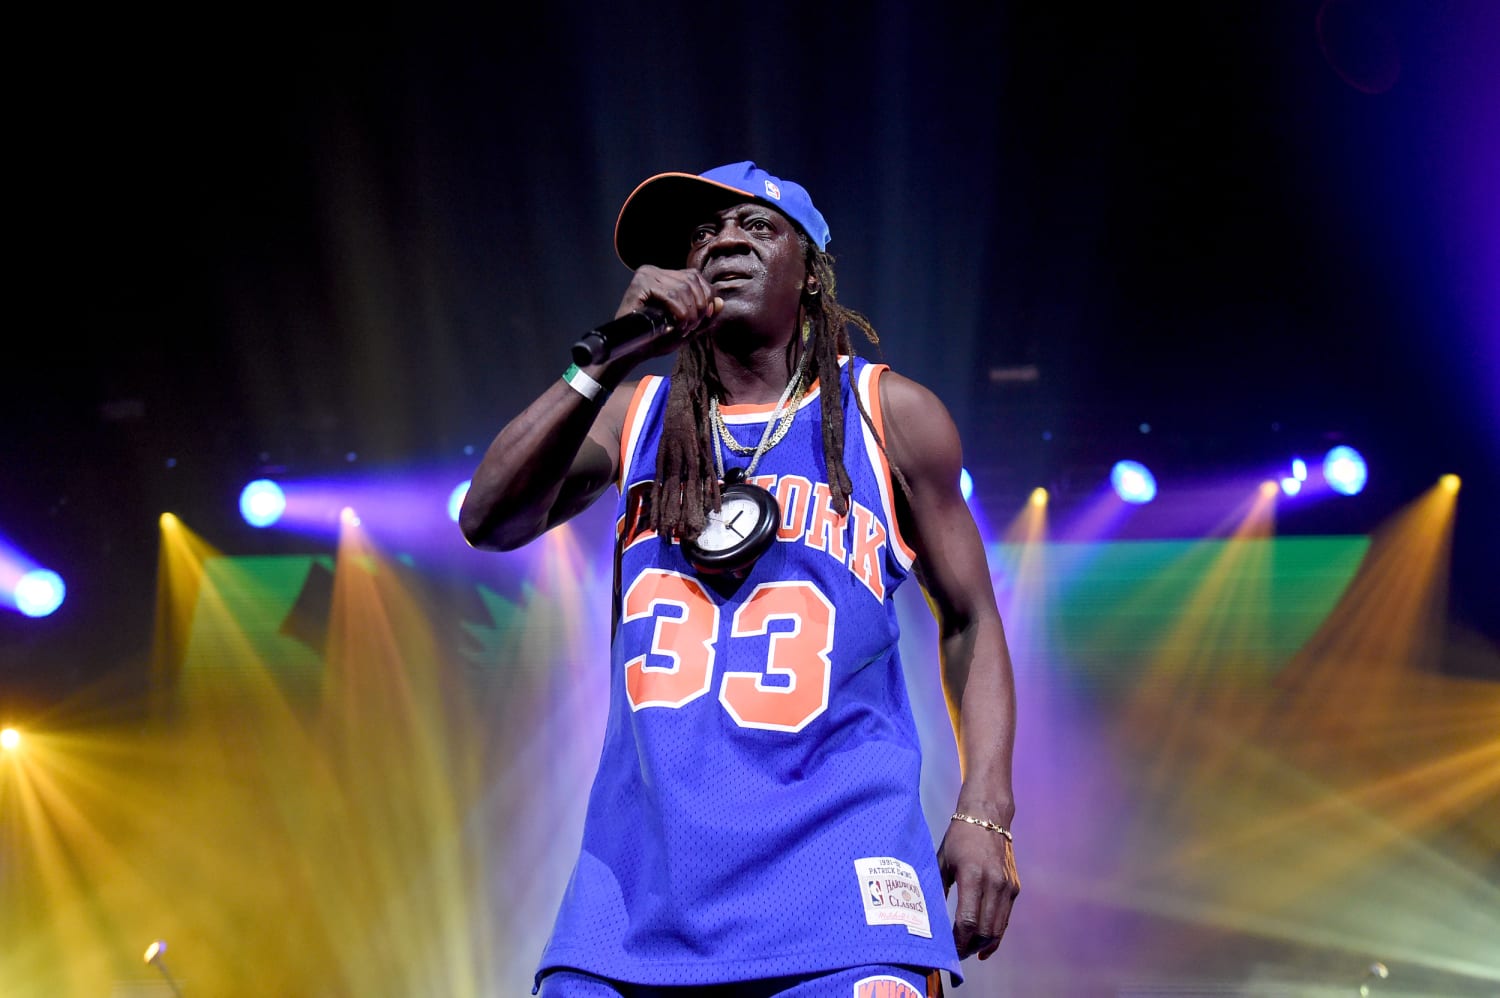 Rapper Flavor Flav faces domestic battery charge, police say.